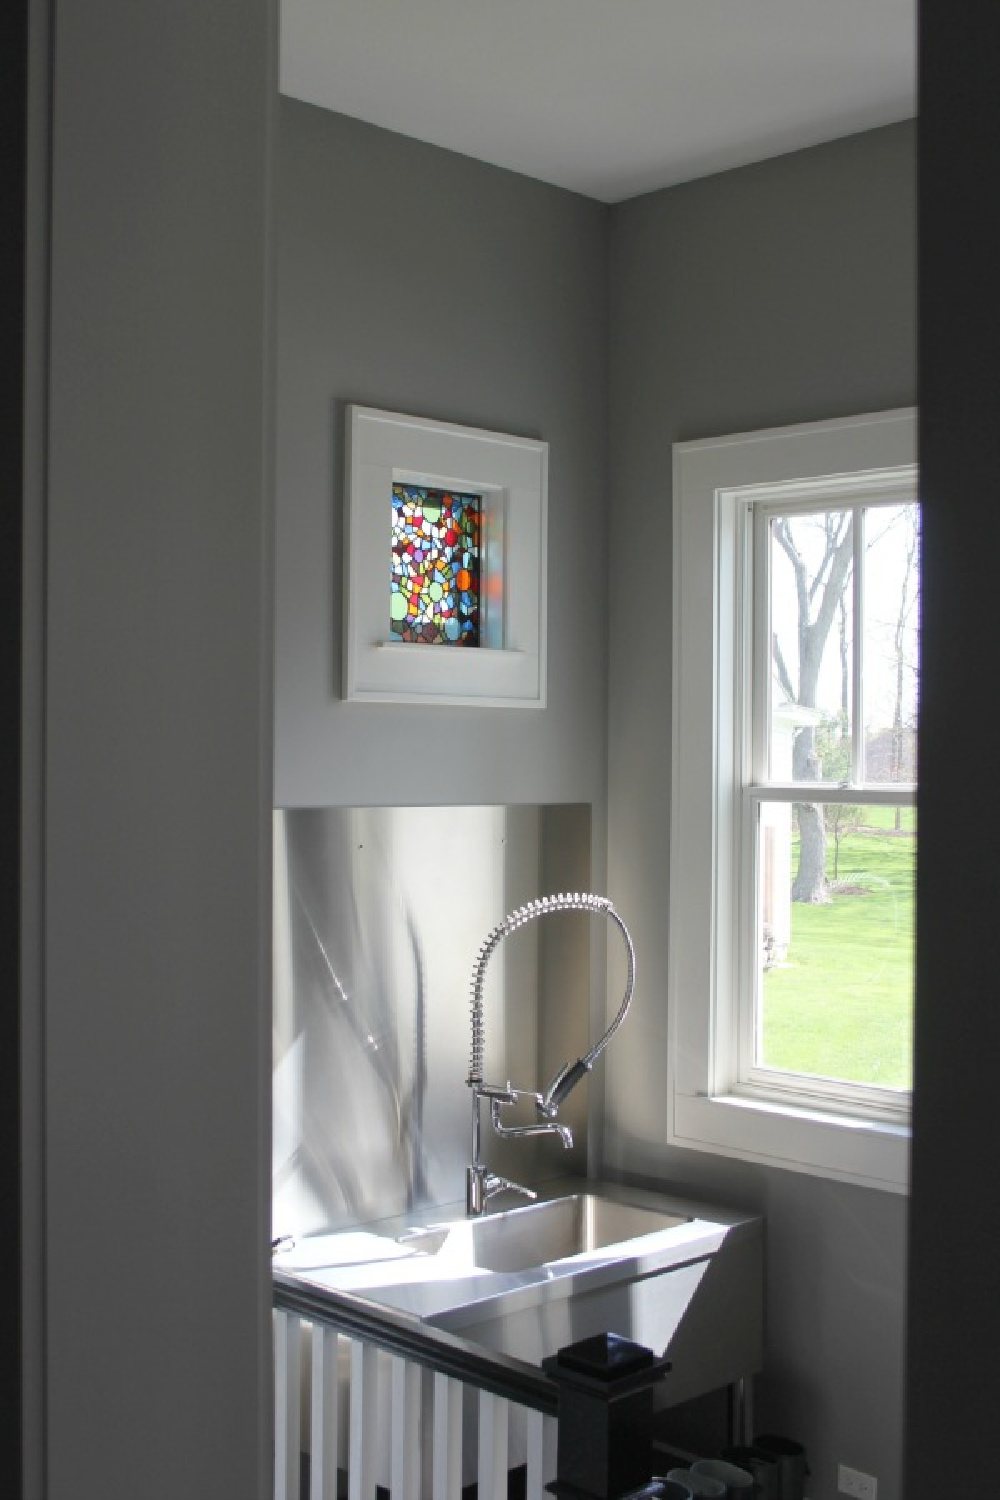 Commercial style stainless sink in modern farmhouse mudroom with stained glass window. #commercialsink #mudrooms #benjaminmoorestoningtongray